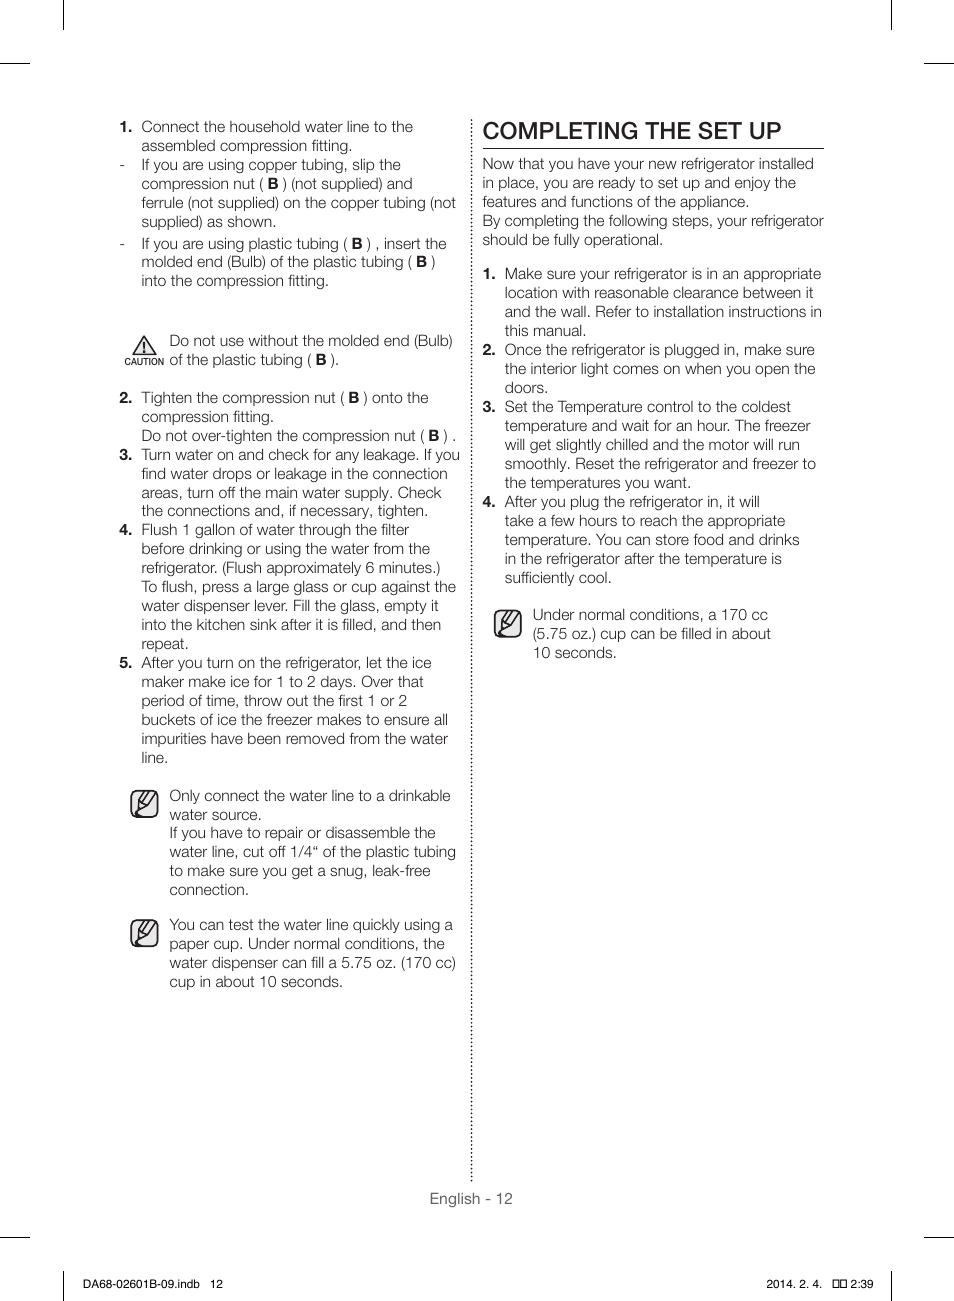 Completing the set up | Samsung RF261BIAESR-AA User Manual | Page 12 / 84